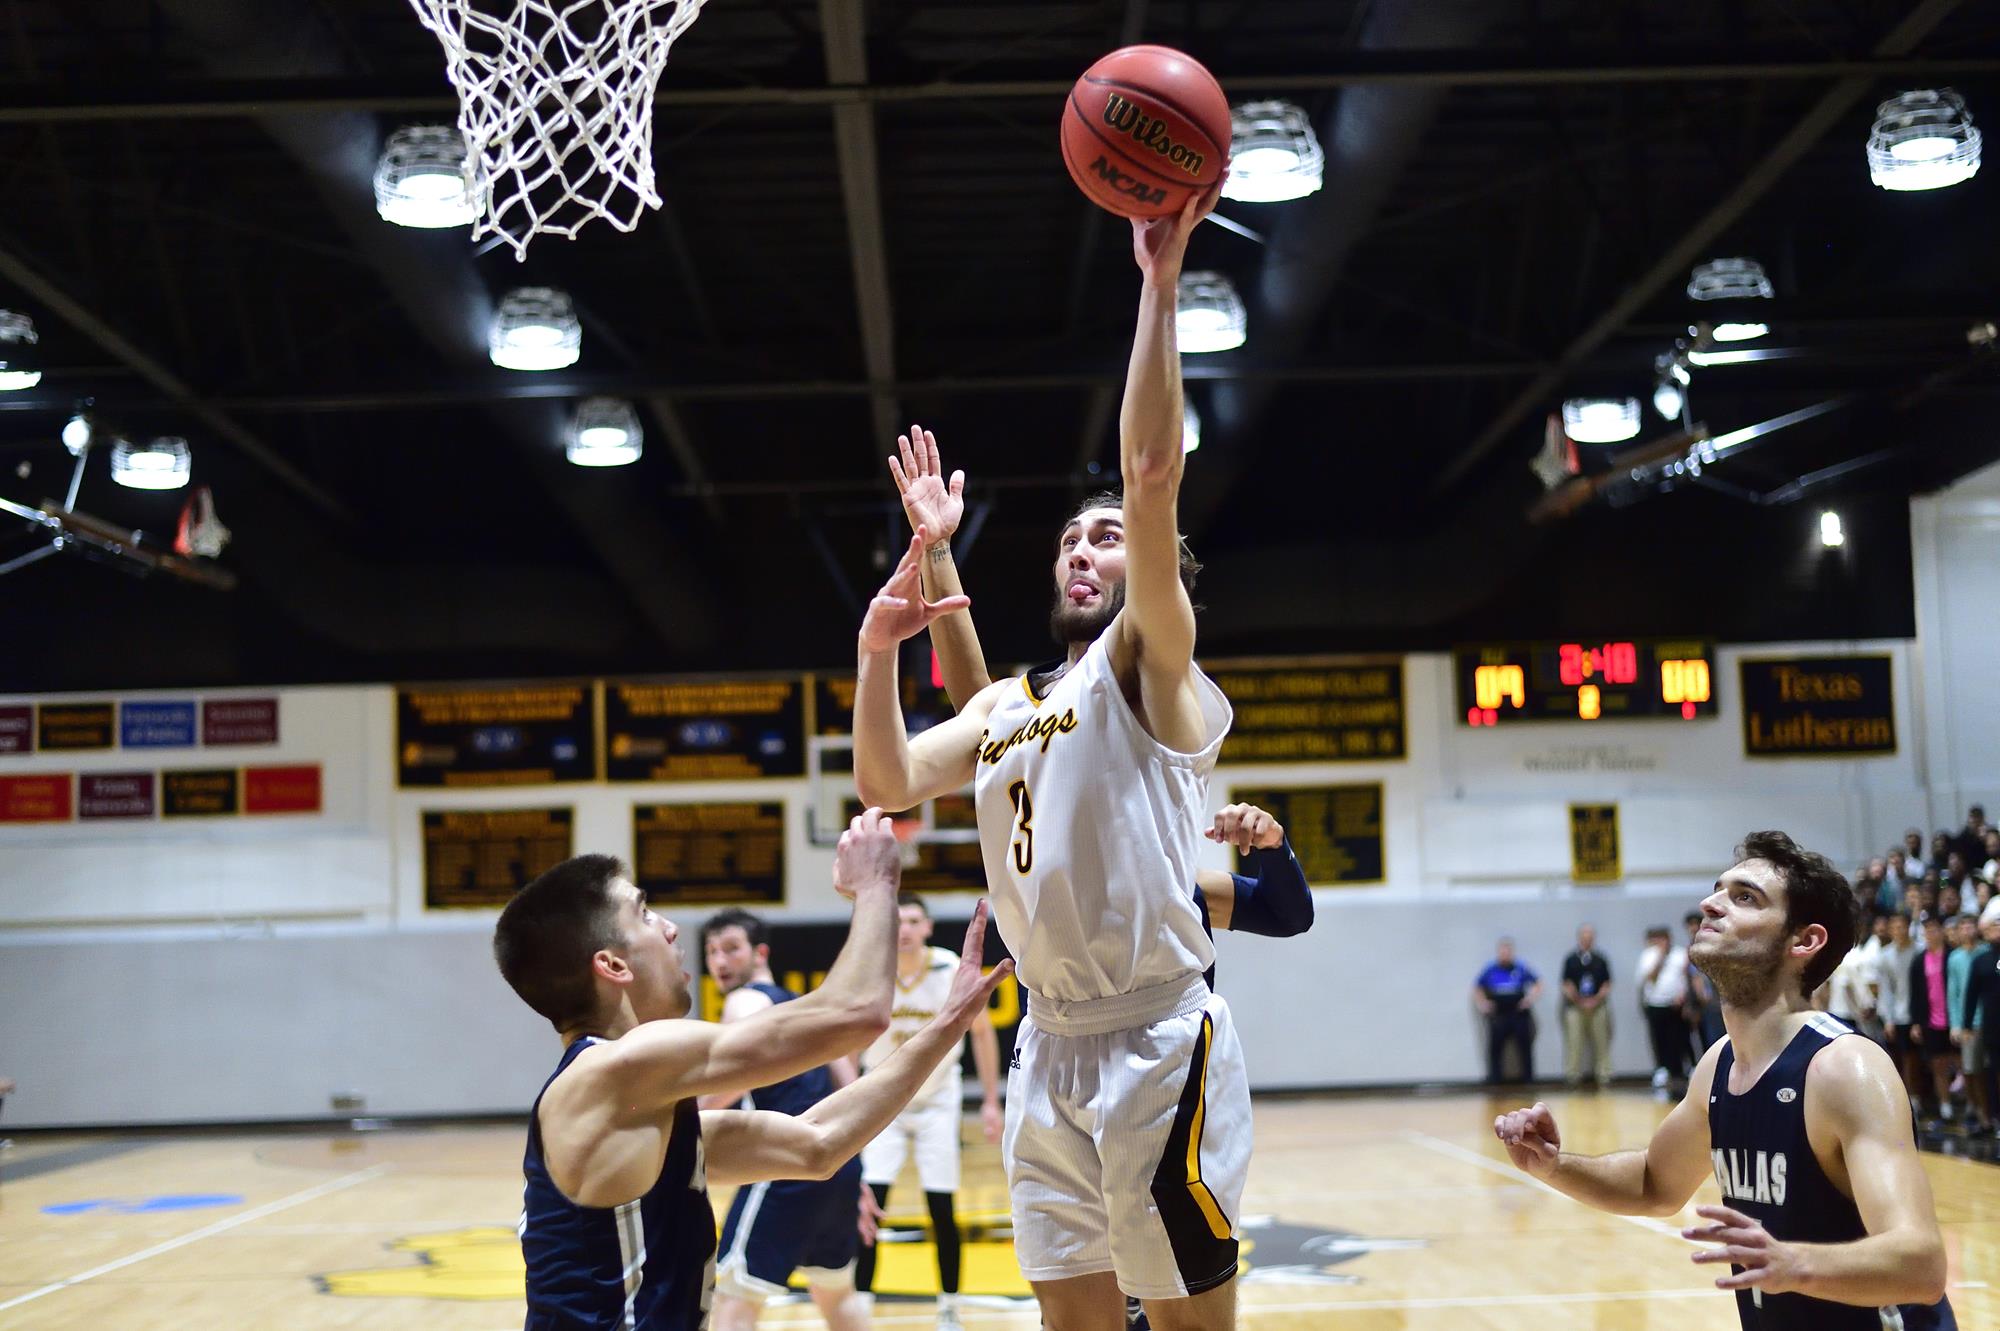 Photo Gallery: Texas Lutheran v Dallas in SCAC MBB Championship